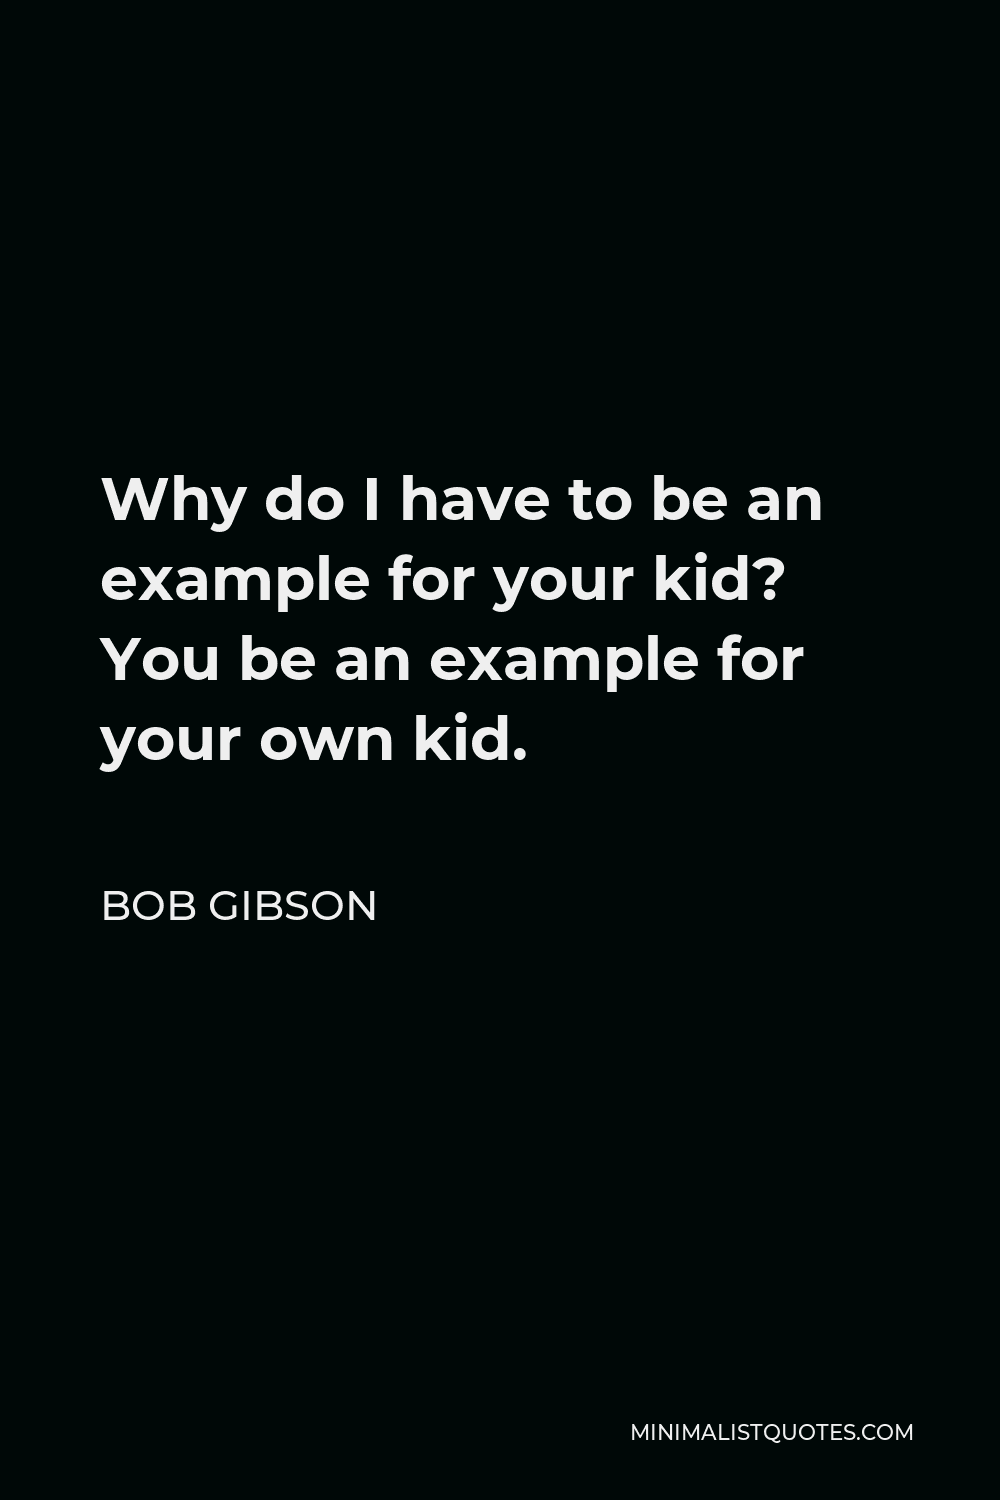 Bob Gibson Quote - Why do I have to be an example for your kid? You be an example for your own kid.